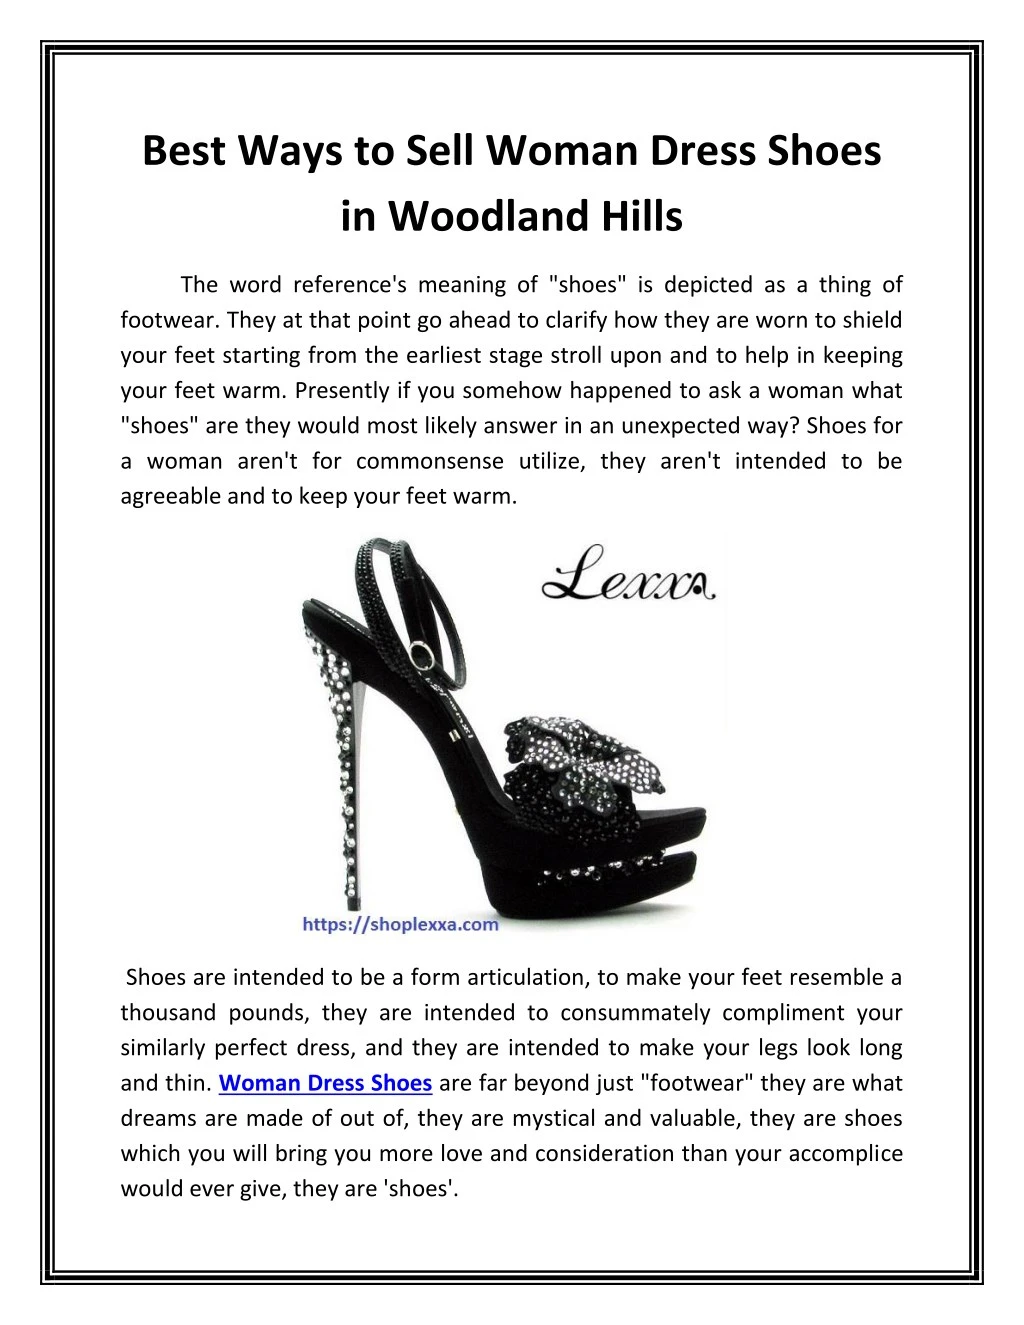 best ways to sell woman dress shoes in woodland